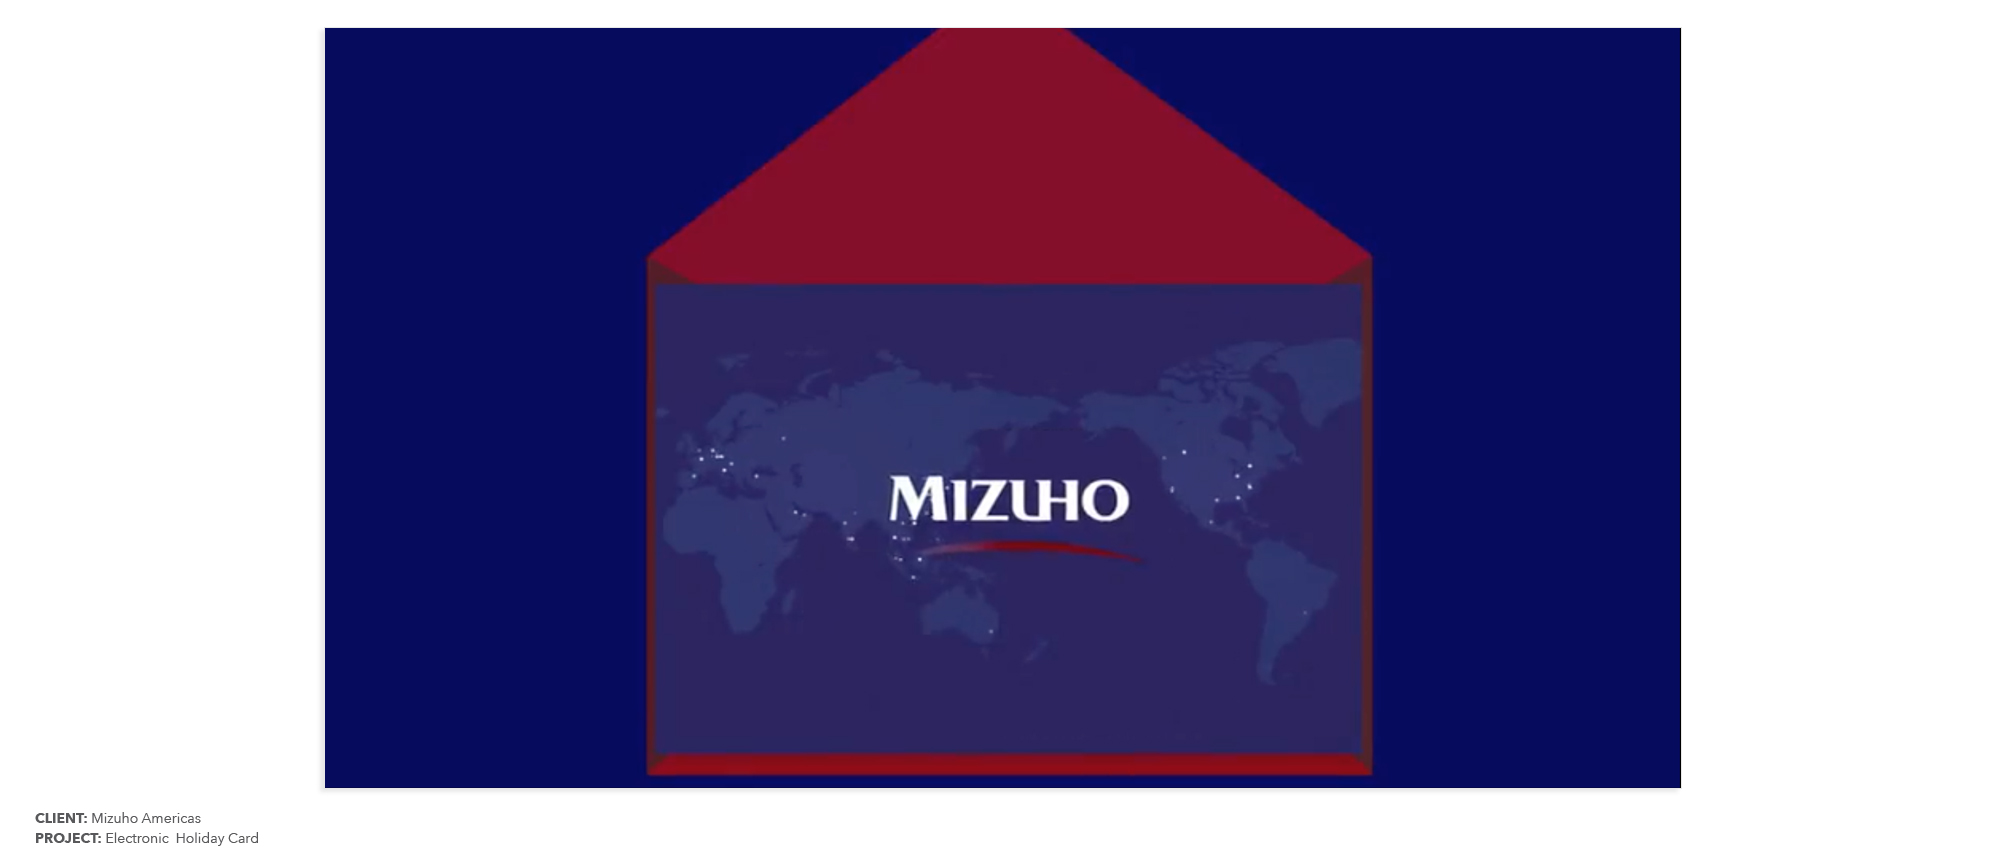 Mizuho Email Card